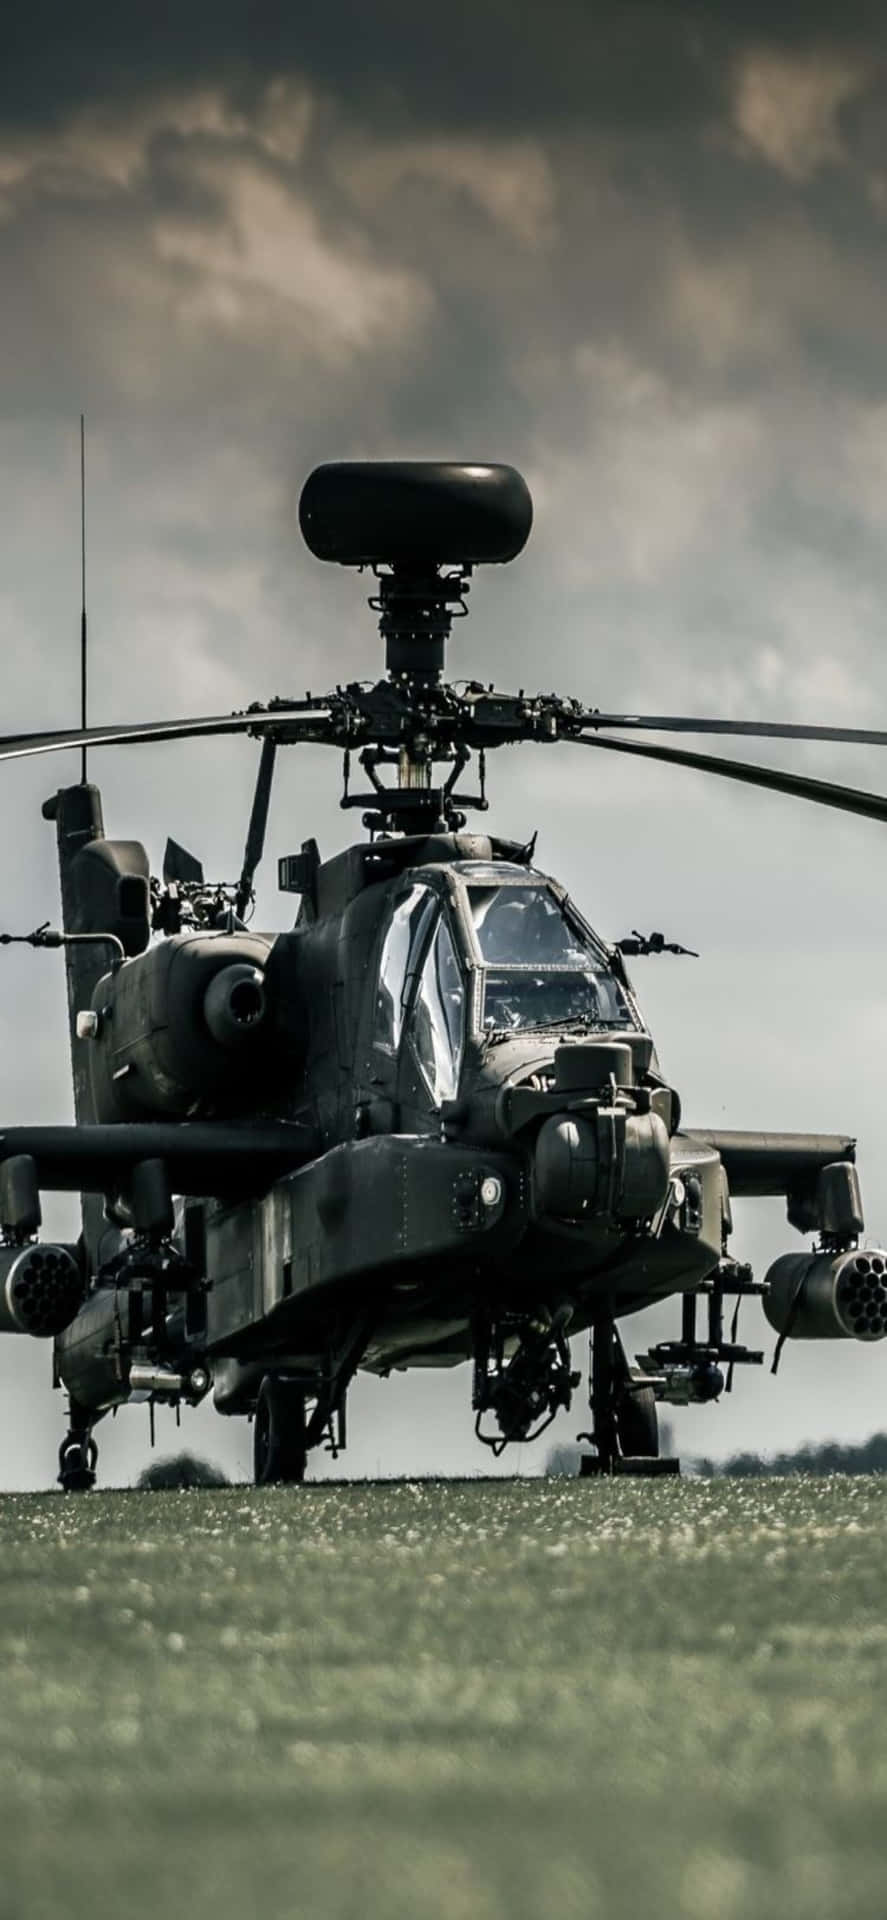 A Black Military Helicopter Is Sitting On The Ground